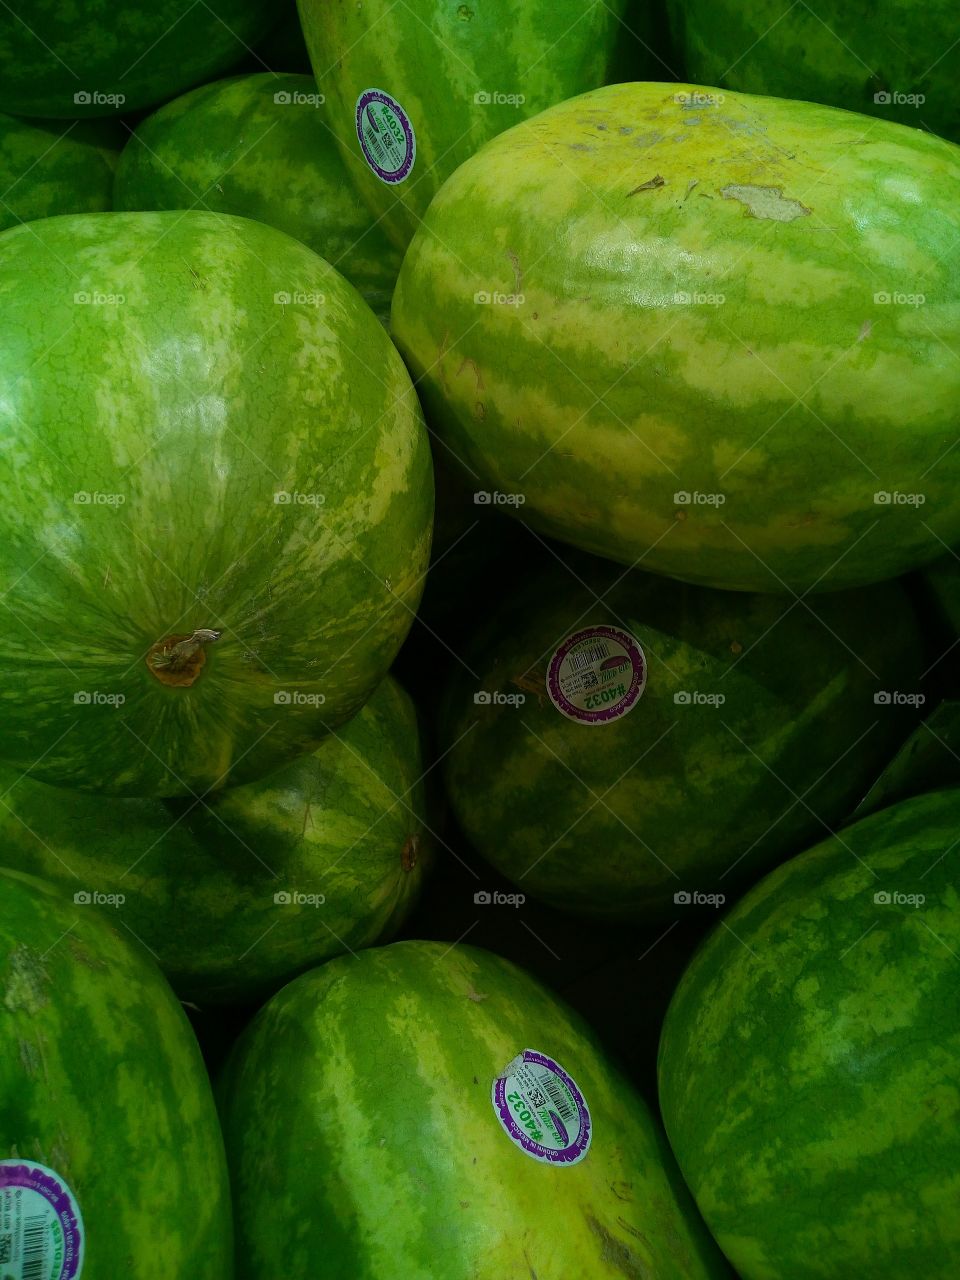 Green, round and ready to eat! Watermelons in all shapes and sizes. such a Delicious and Thirst Quenching Fruit!